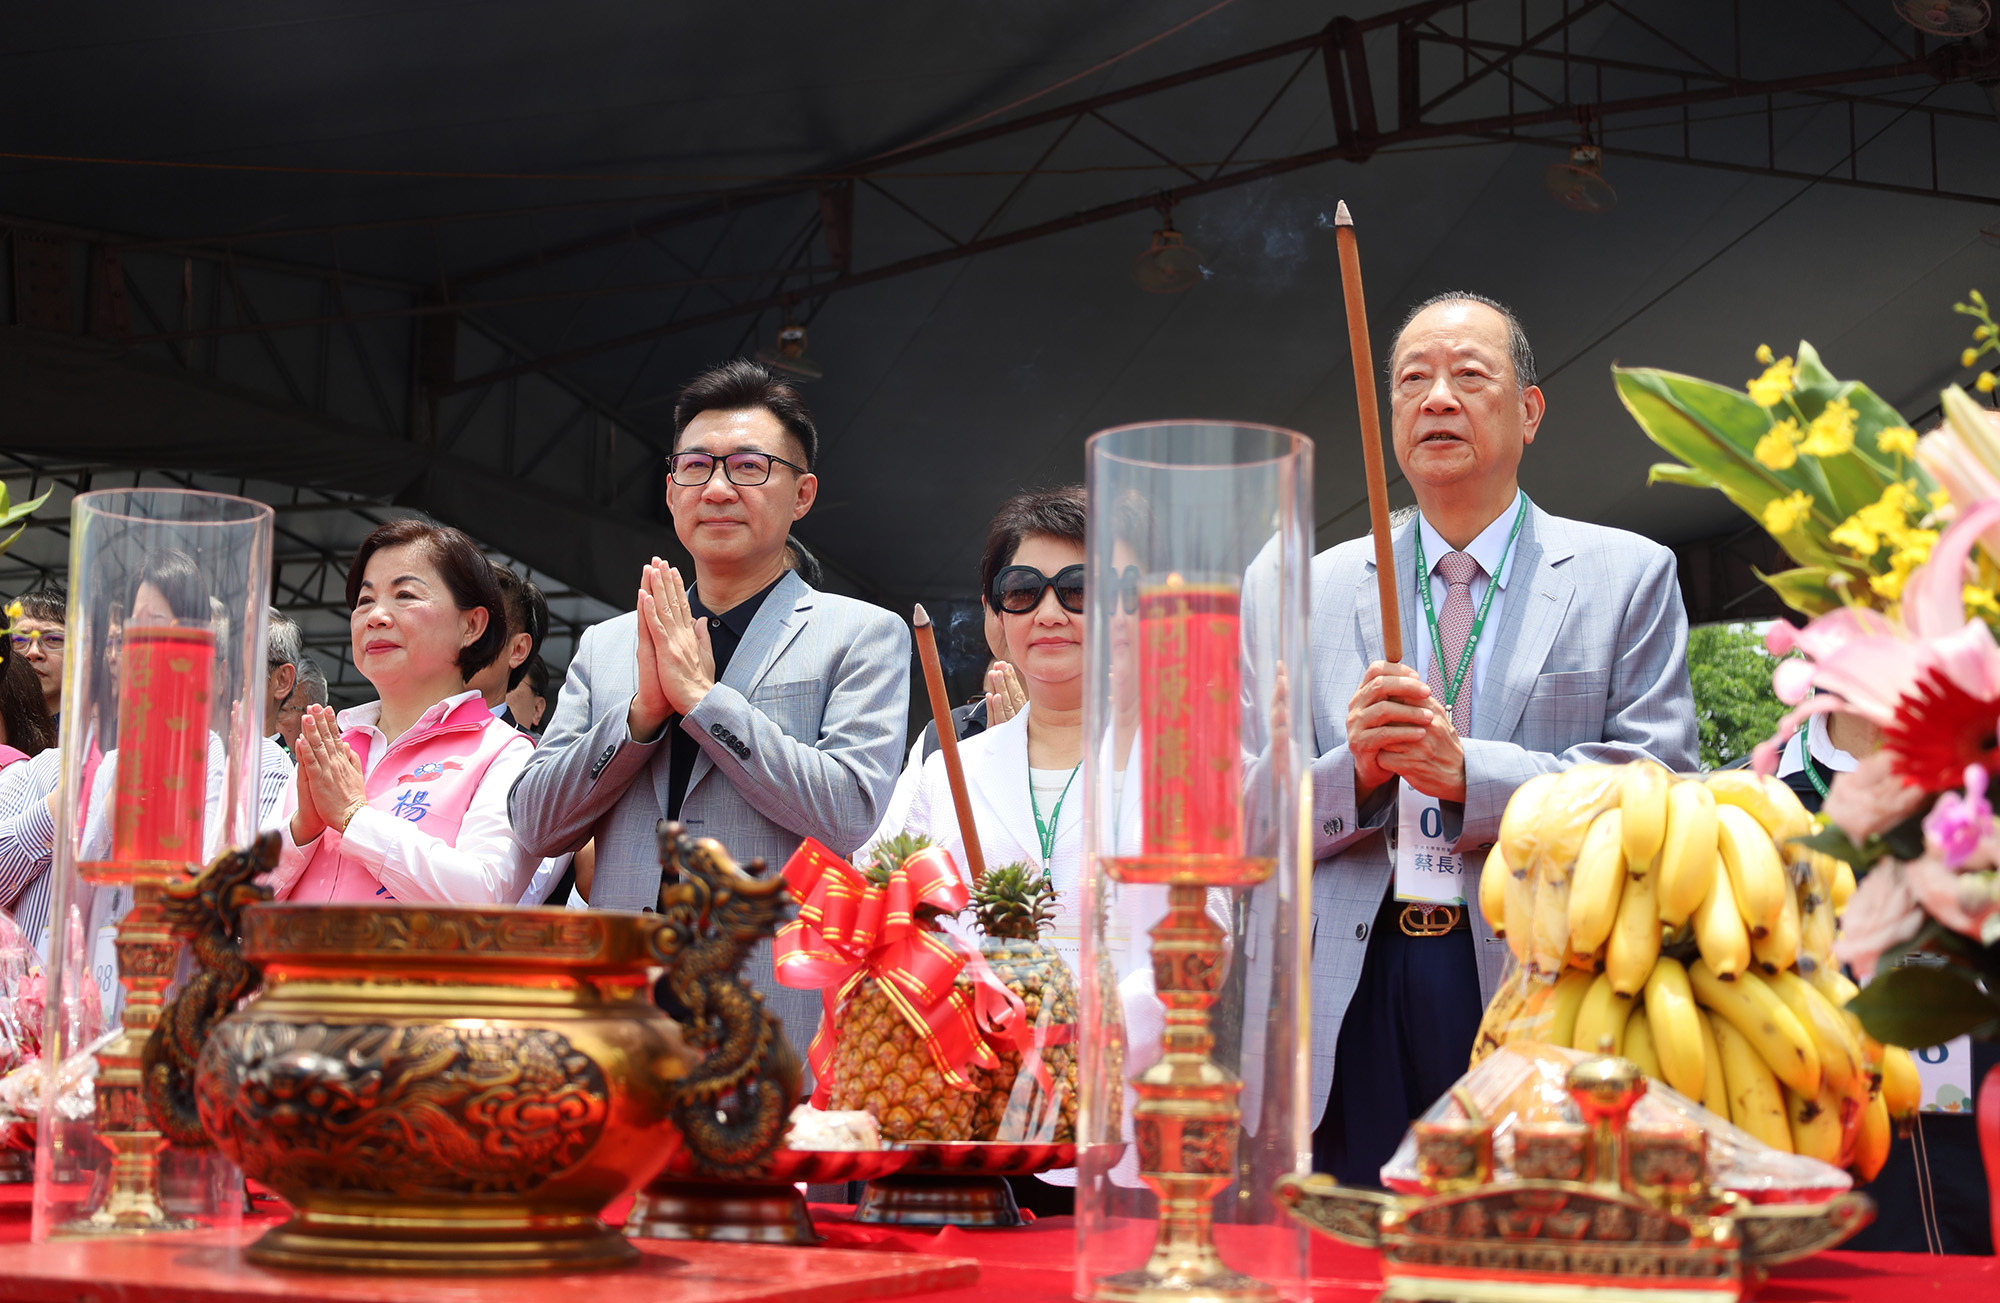 The groundbreaking ceremony of the "Asia University Fengfu Health Park," featuring (from right to left) Chang-Hai Tsai, the founder of Asia University, Mayor Hsiu-Yen Lu of Taichung City, Deputy Speaker of the Legislative Yuan Chi-Chen Chiang, and Legislator Chiung-Ying Yang